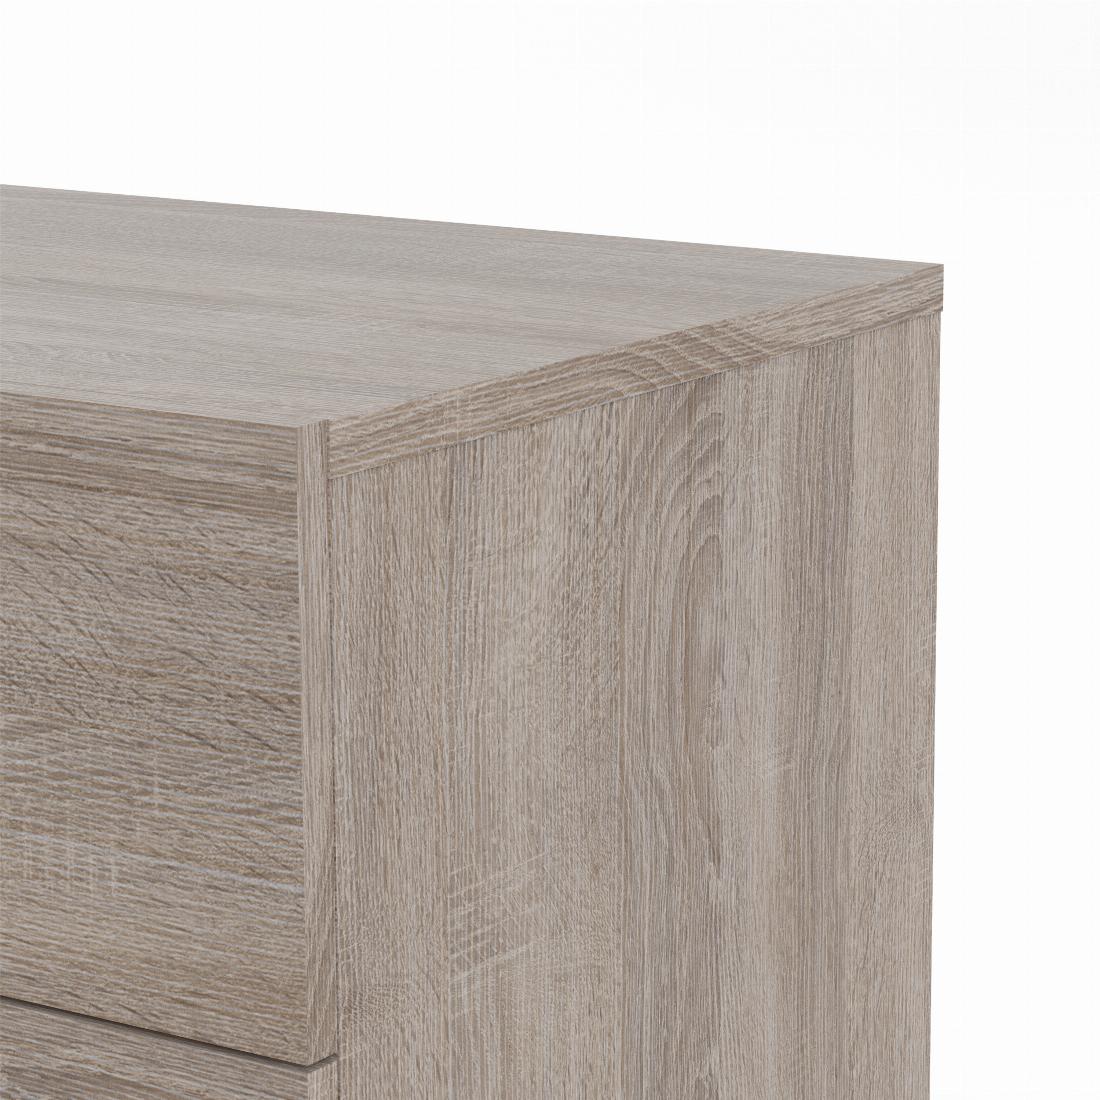 Pepe Chest of 5 Drawers in Truffle Oak